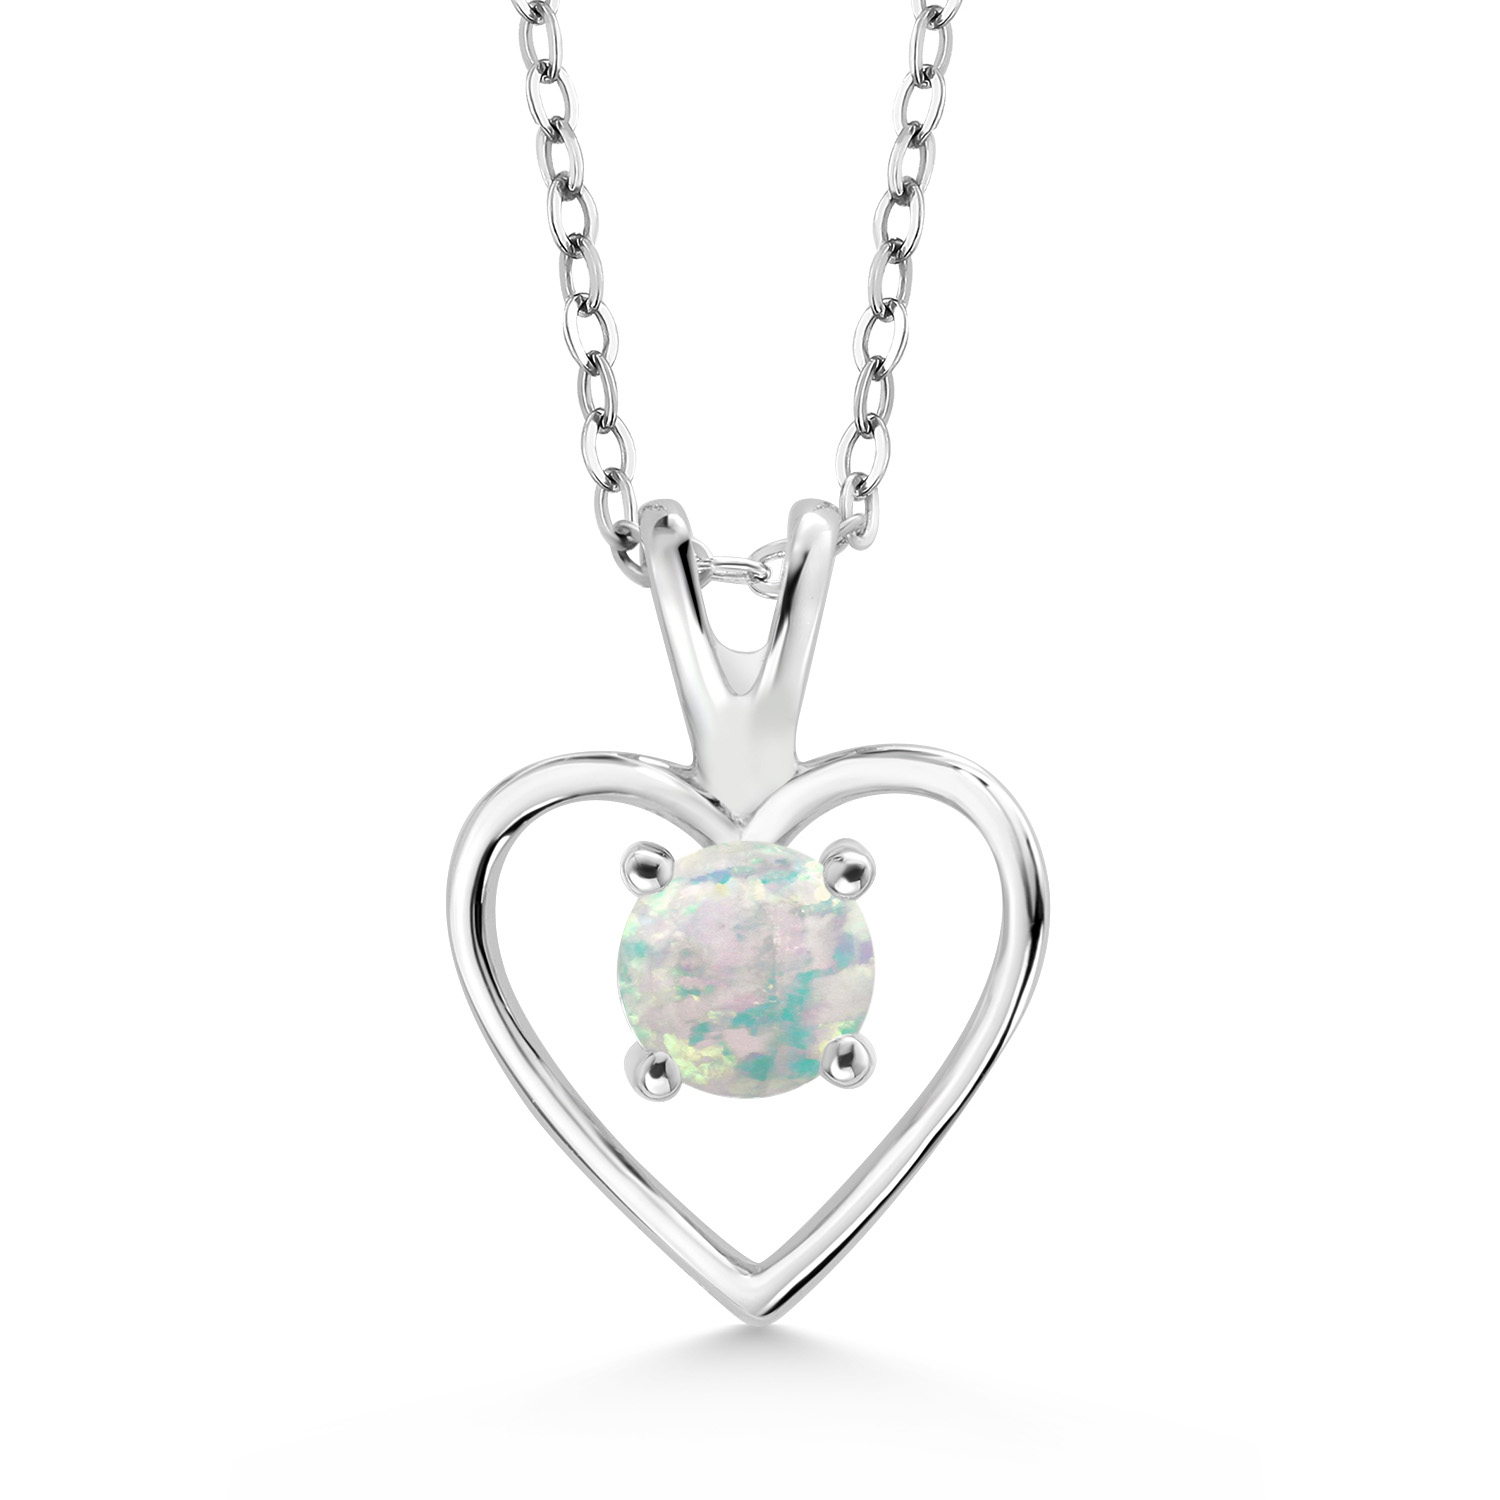 Gem Stone King 0.50 Ct Round Cabochon White Simulated Opal 925 Sterling Silver Heart Shape Pendant Necklace for Women